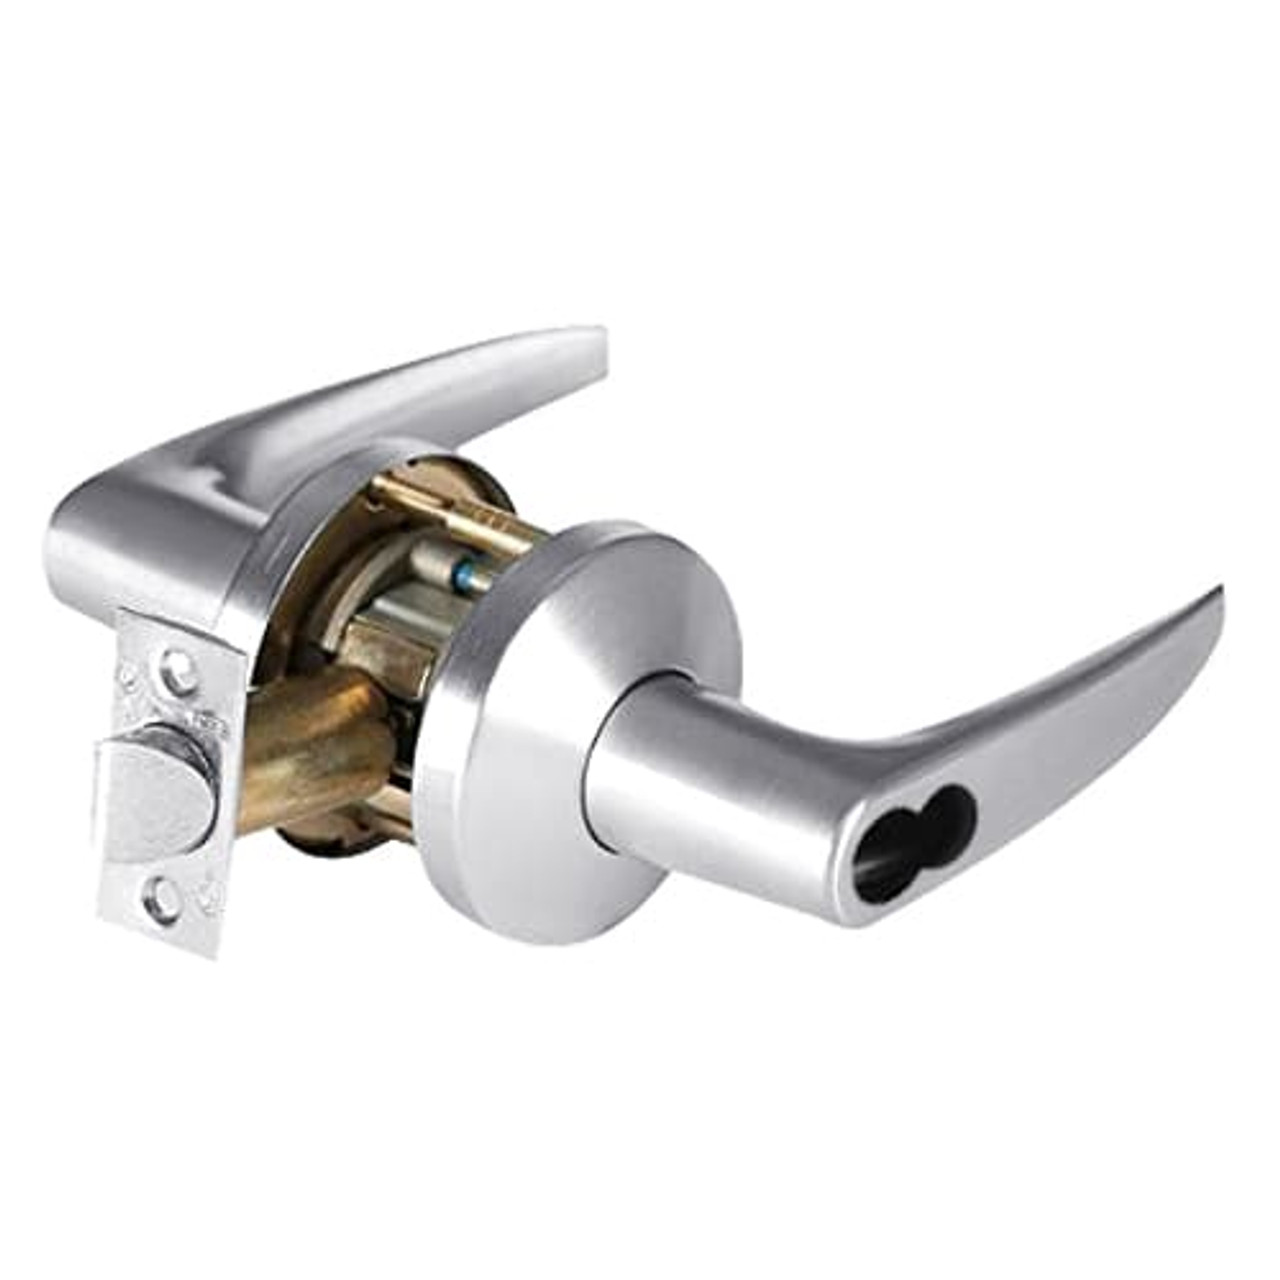 9K37W16KSTK625 Best 9K Series Institutional Cylindrical Lever Locks with Curved without Return Lever Design Accept 7 Pin Best Core in Bright Chrome